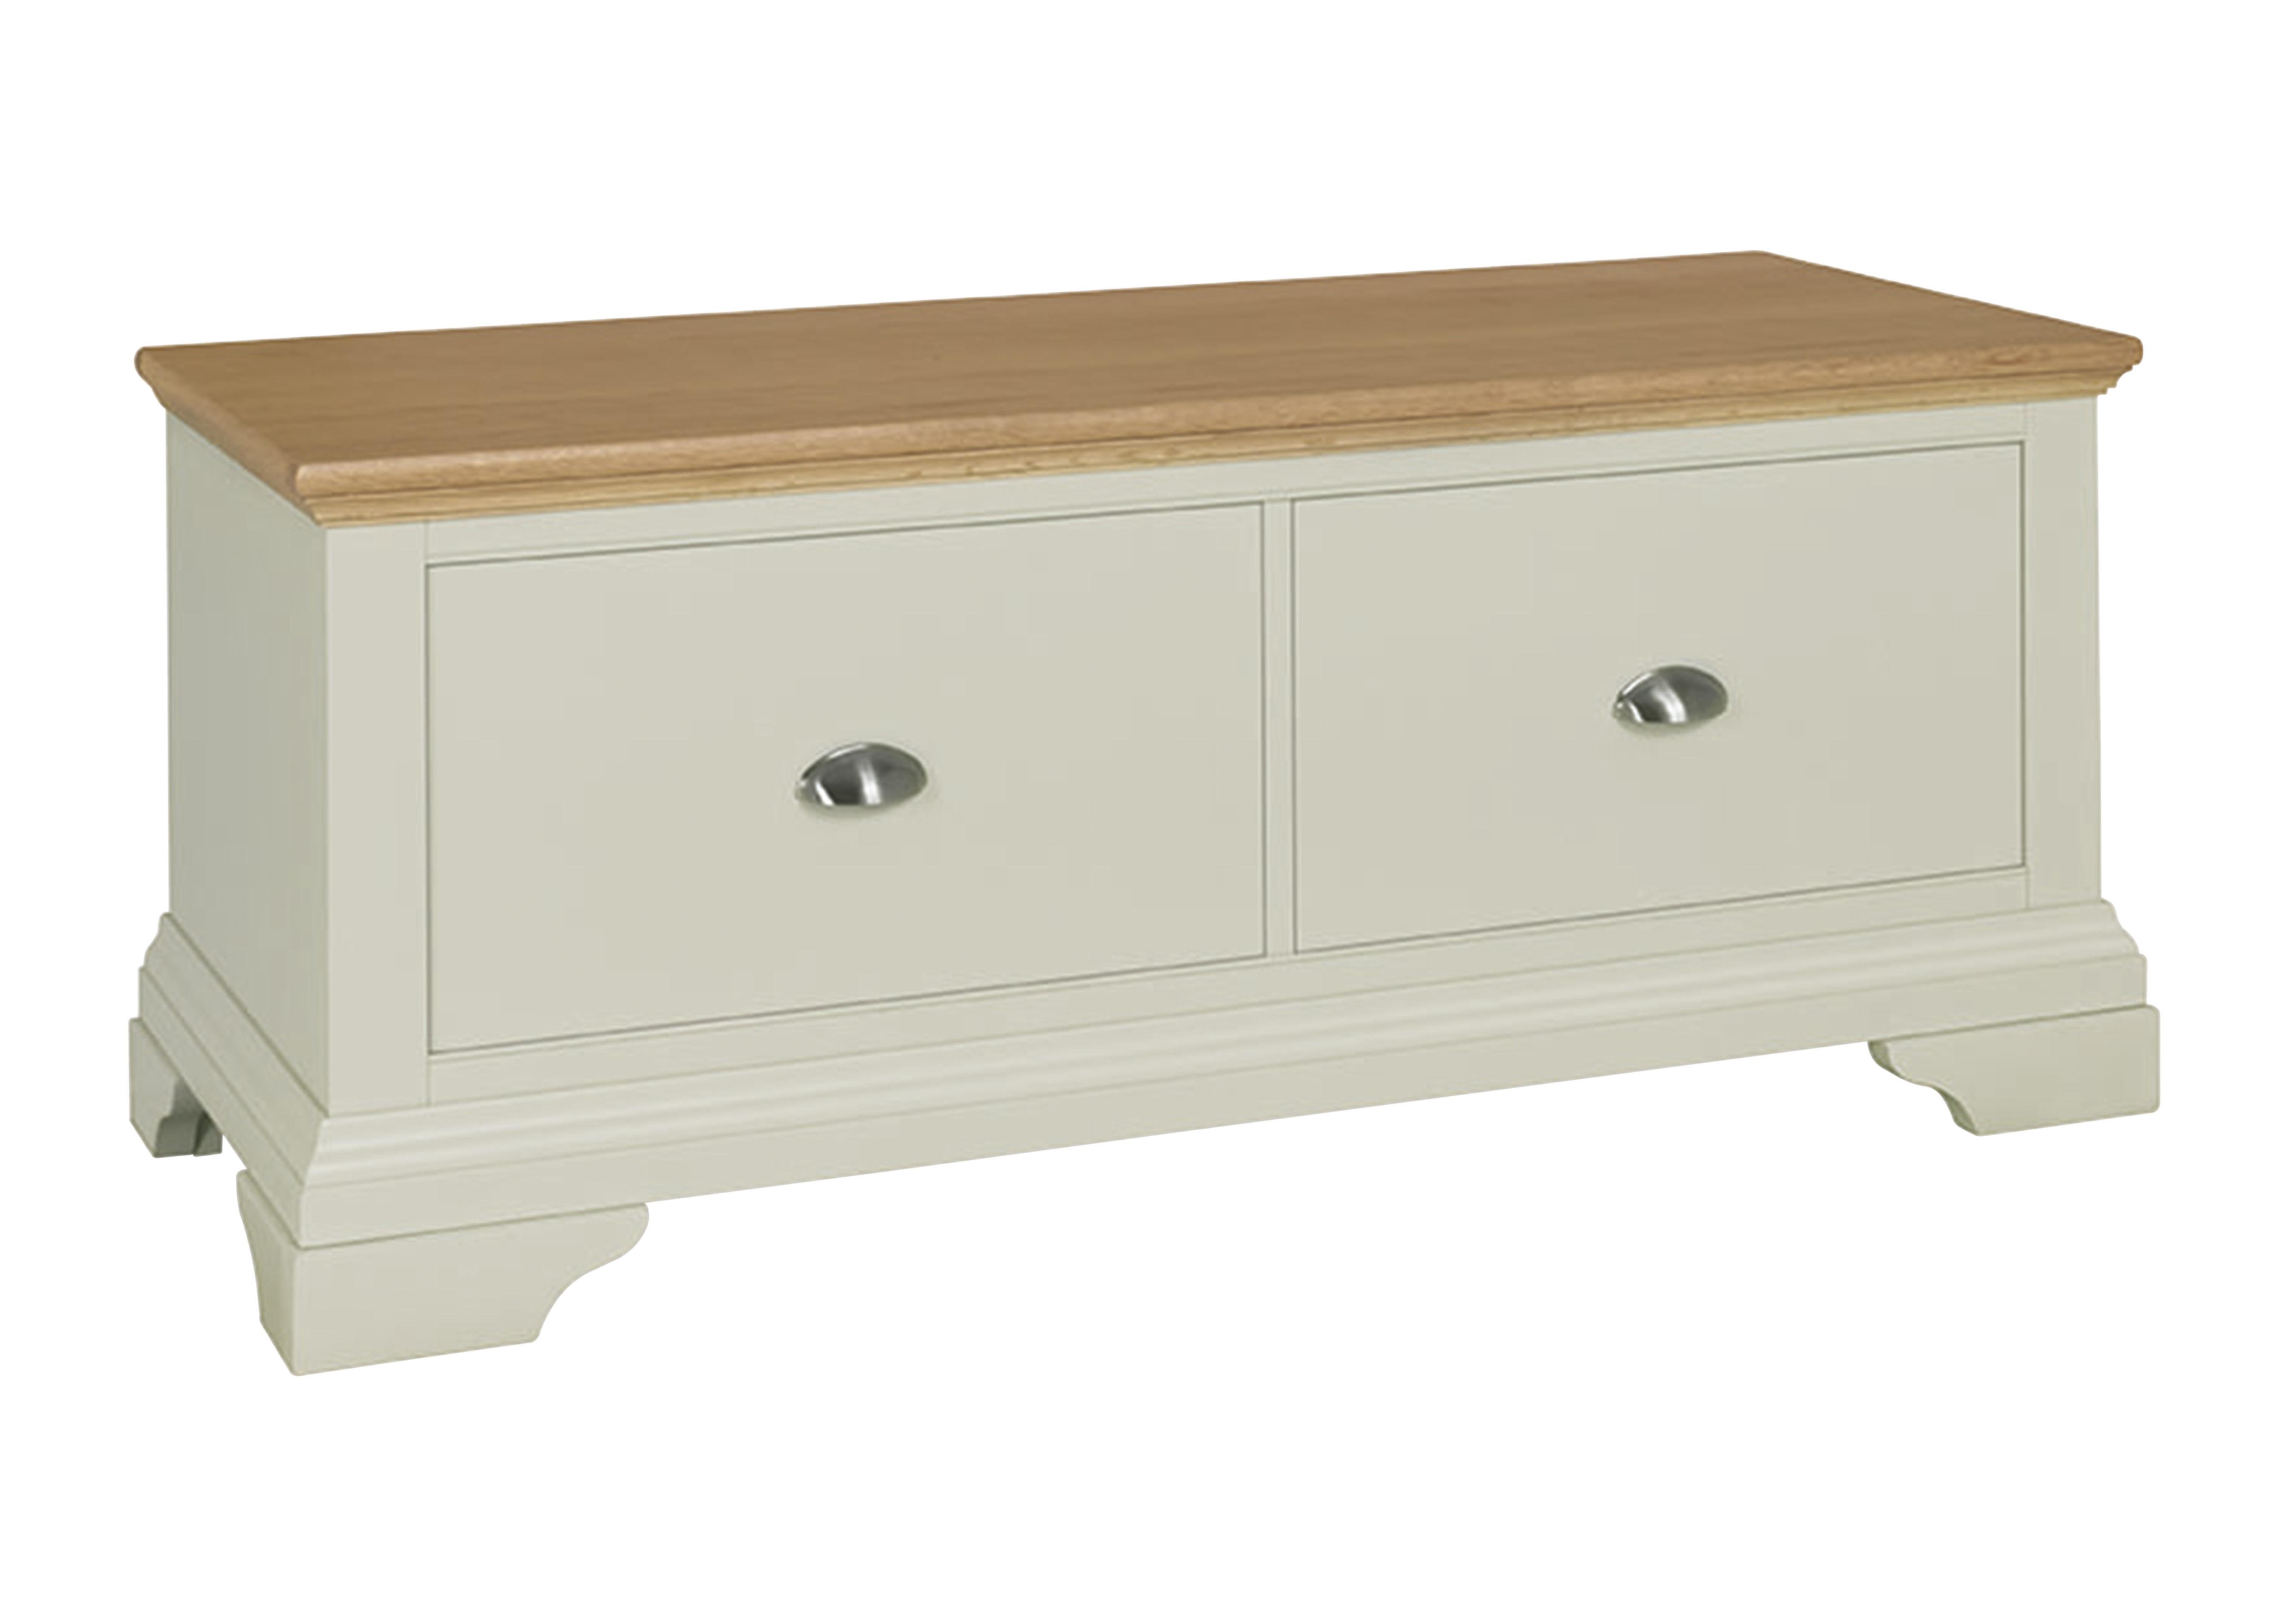 Emily Blanket Box in Soft Grey And Oak on Furniture Village